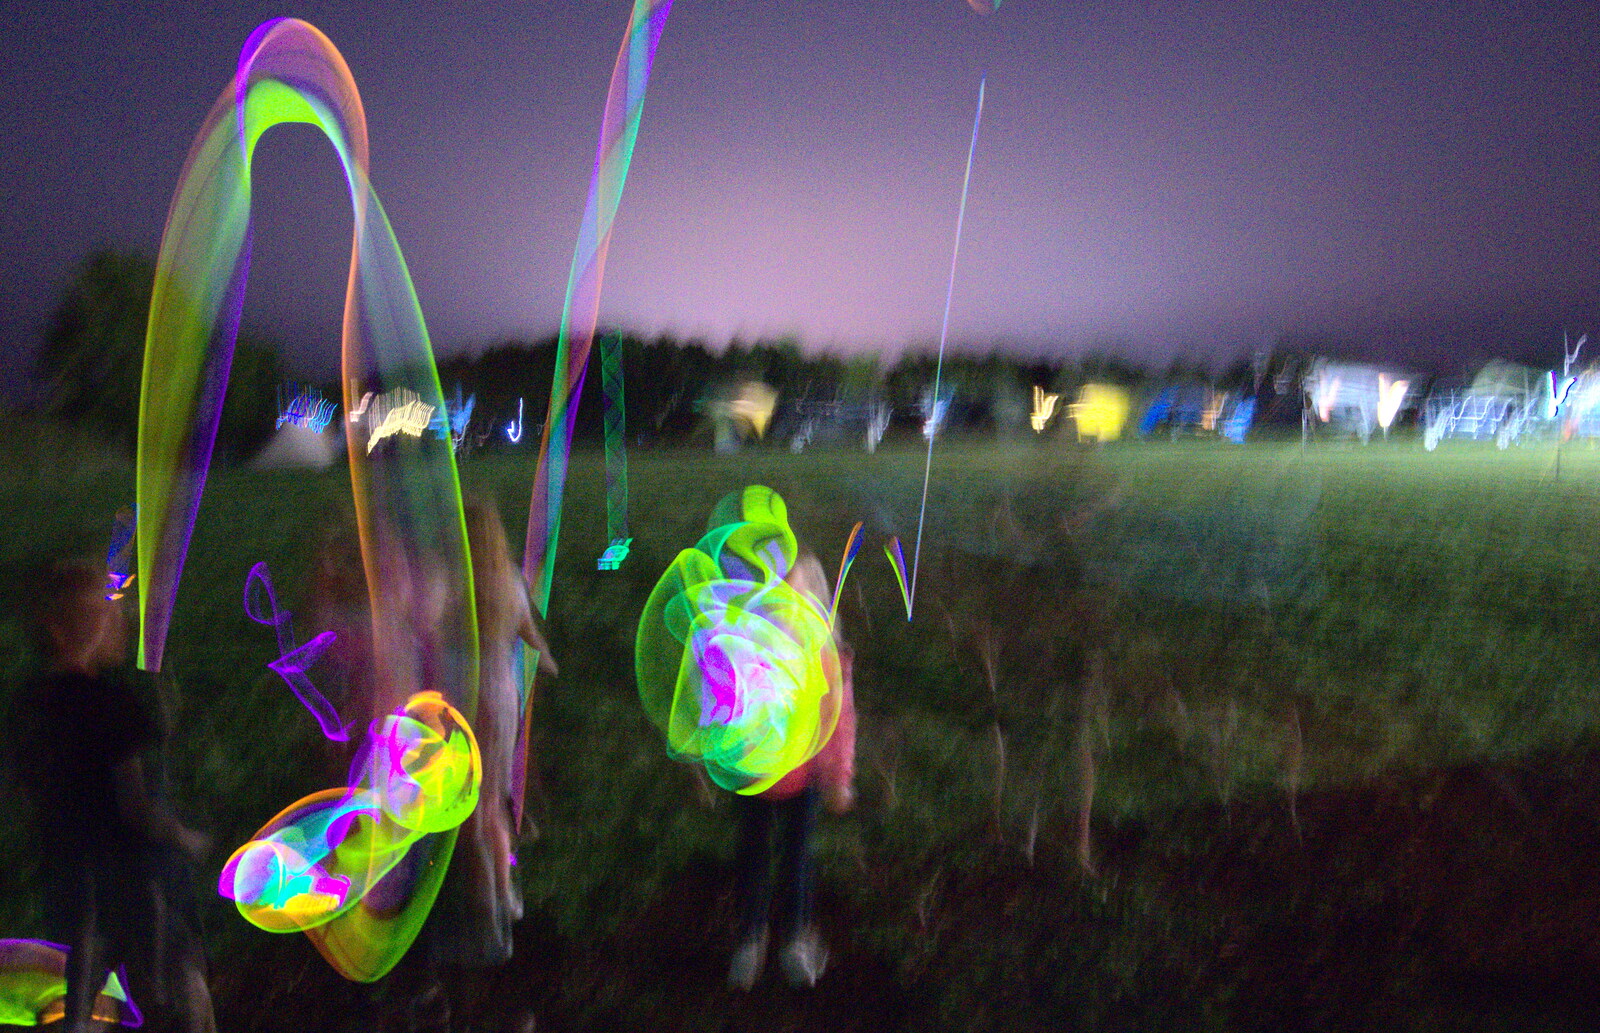 Some glowsticks are hurled into the air from A Spot of Camping, Alton Water, Stutton, Suffolk - 1st September 2018